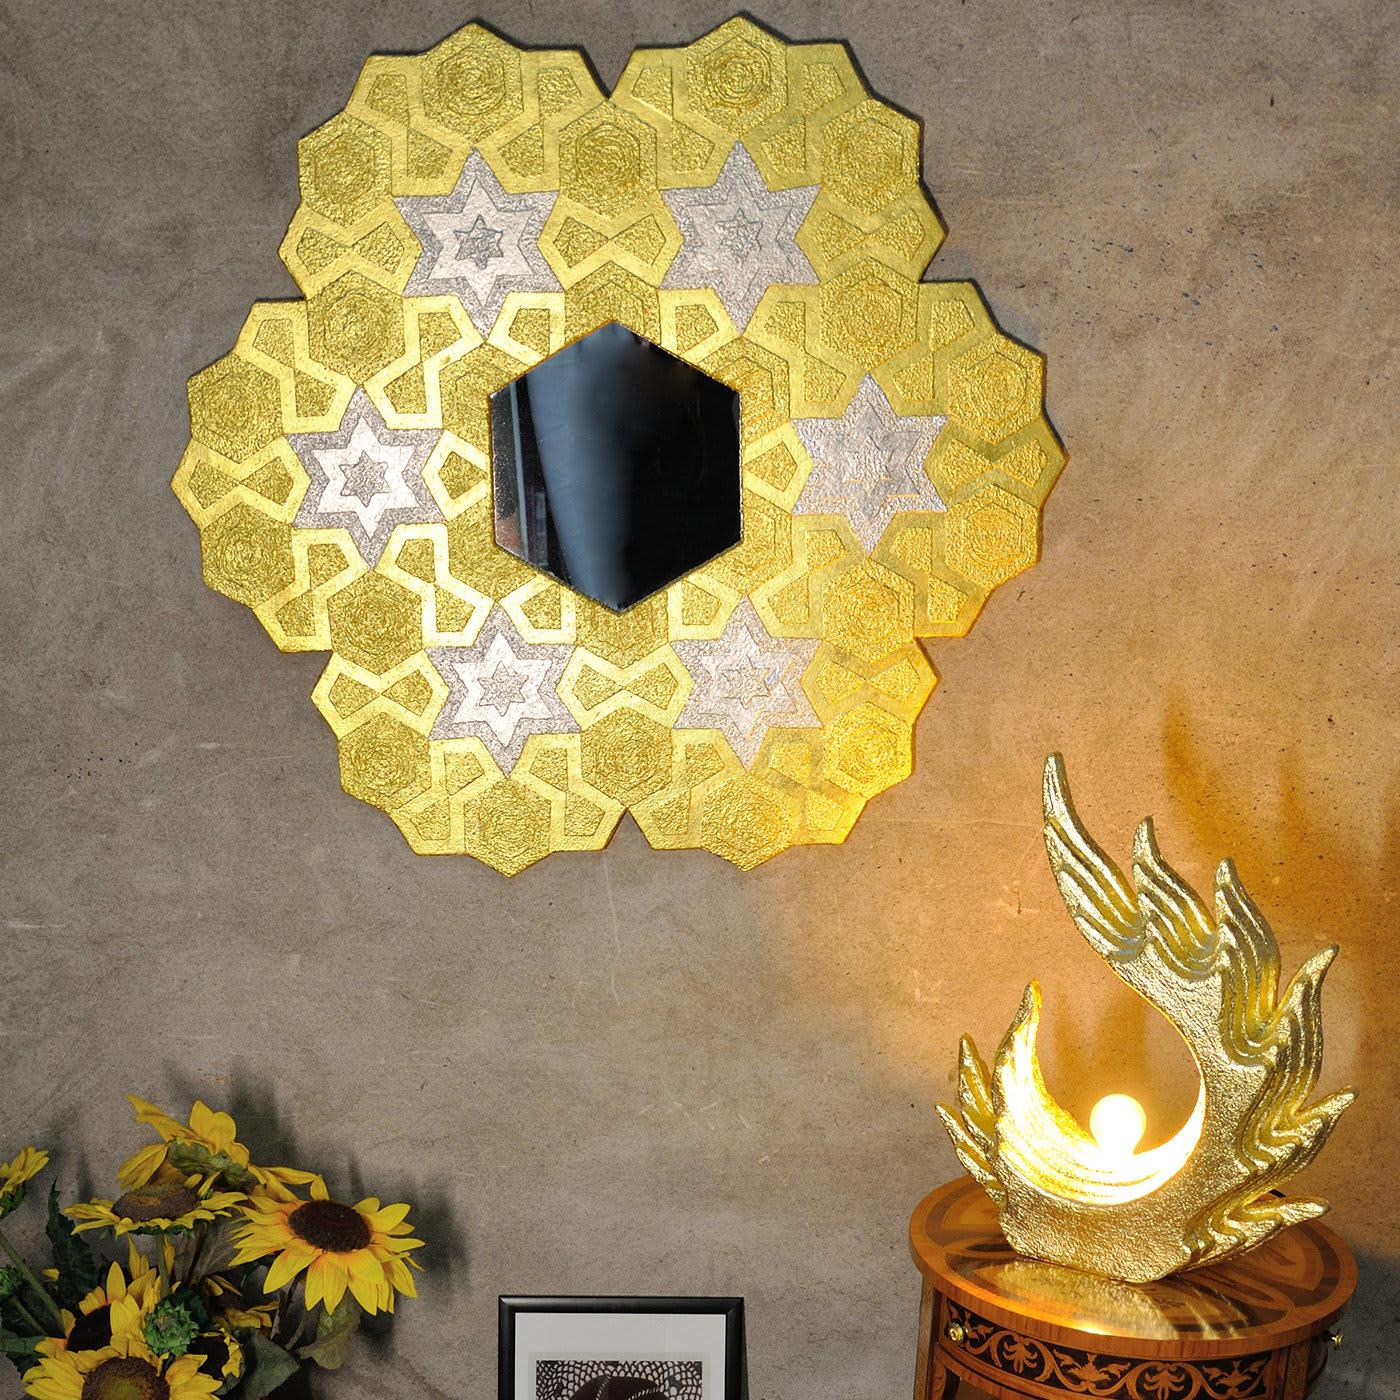 This hexagonal wall mirror is a remarkable feat of design and craftsmanship. Symmetrical, graphic decorative patterns of Arabesque inspiration combine and duplicate in a striking visual allure on the wooden frame enclosing the mirror in the center.